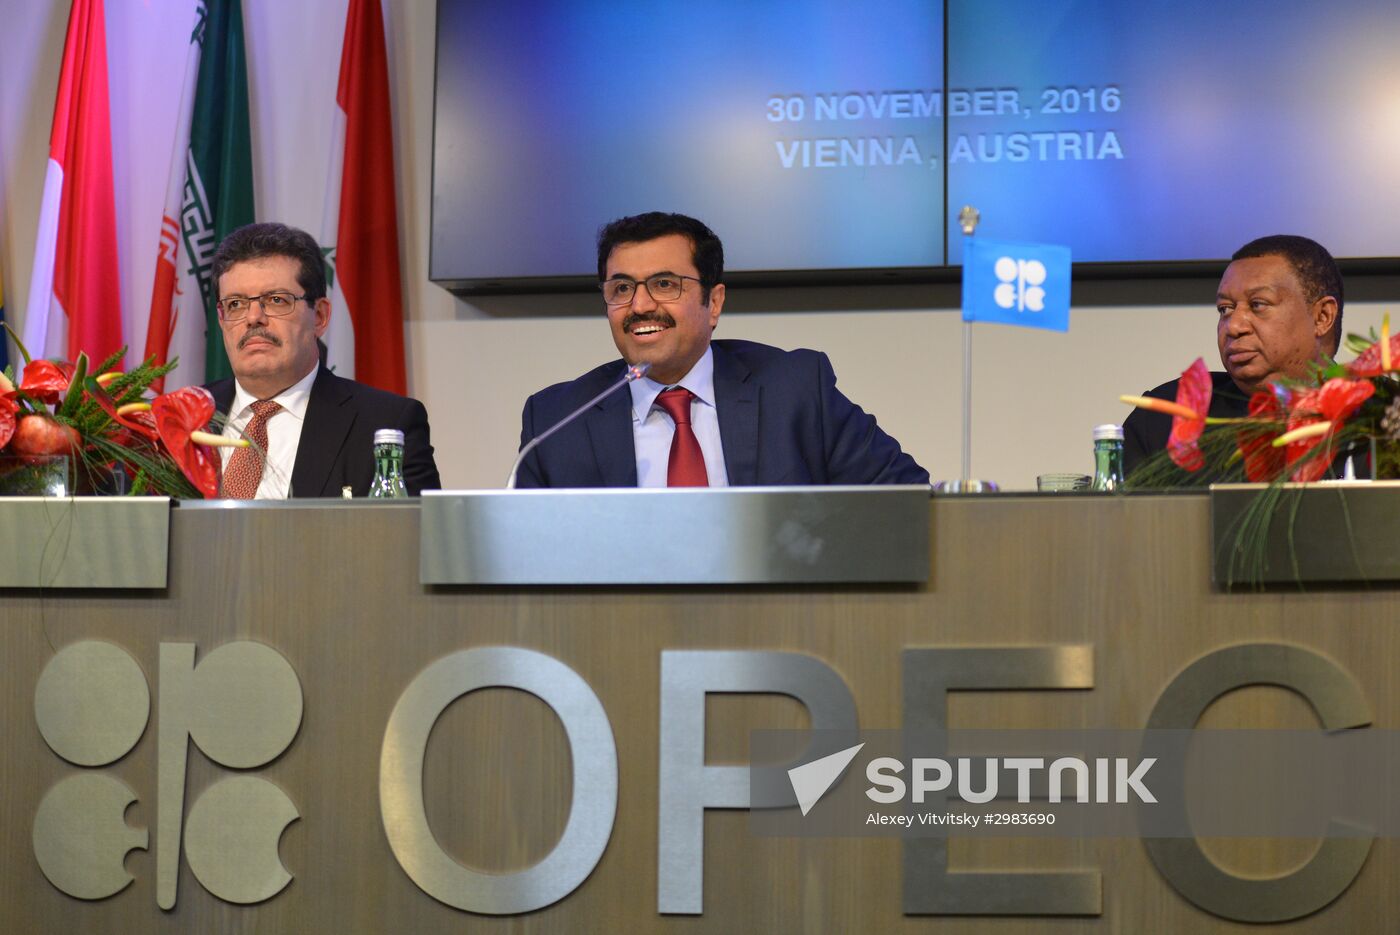 News conference following OPEC meeting in Vienna